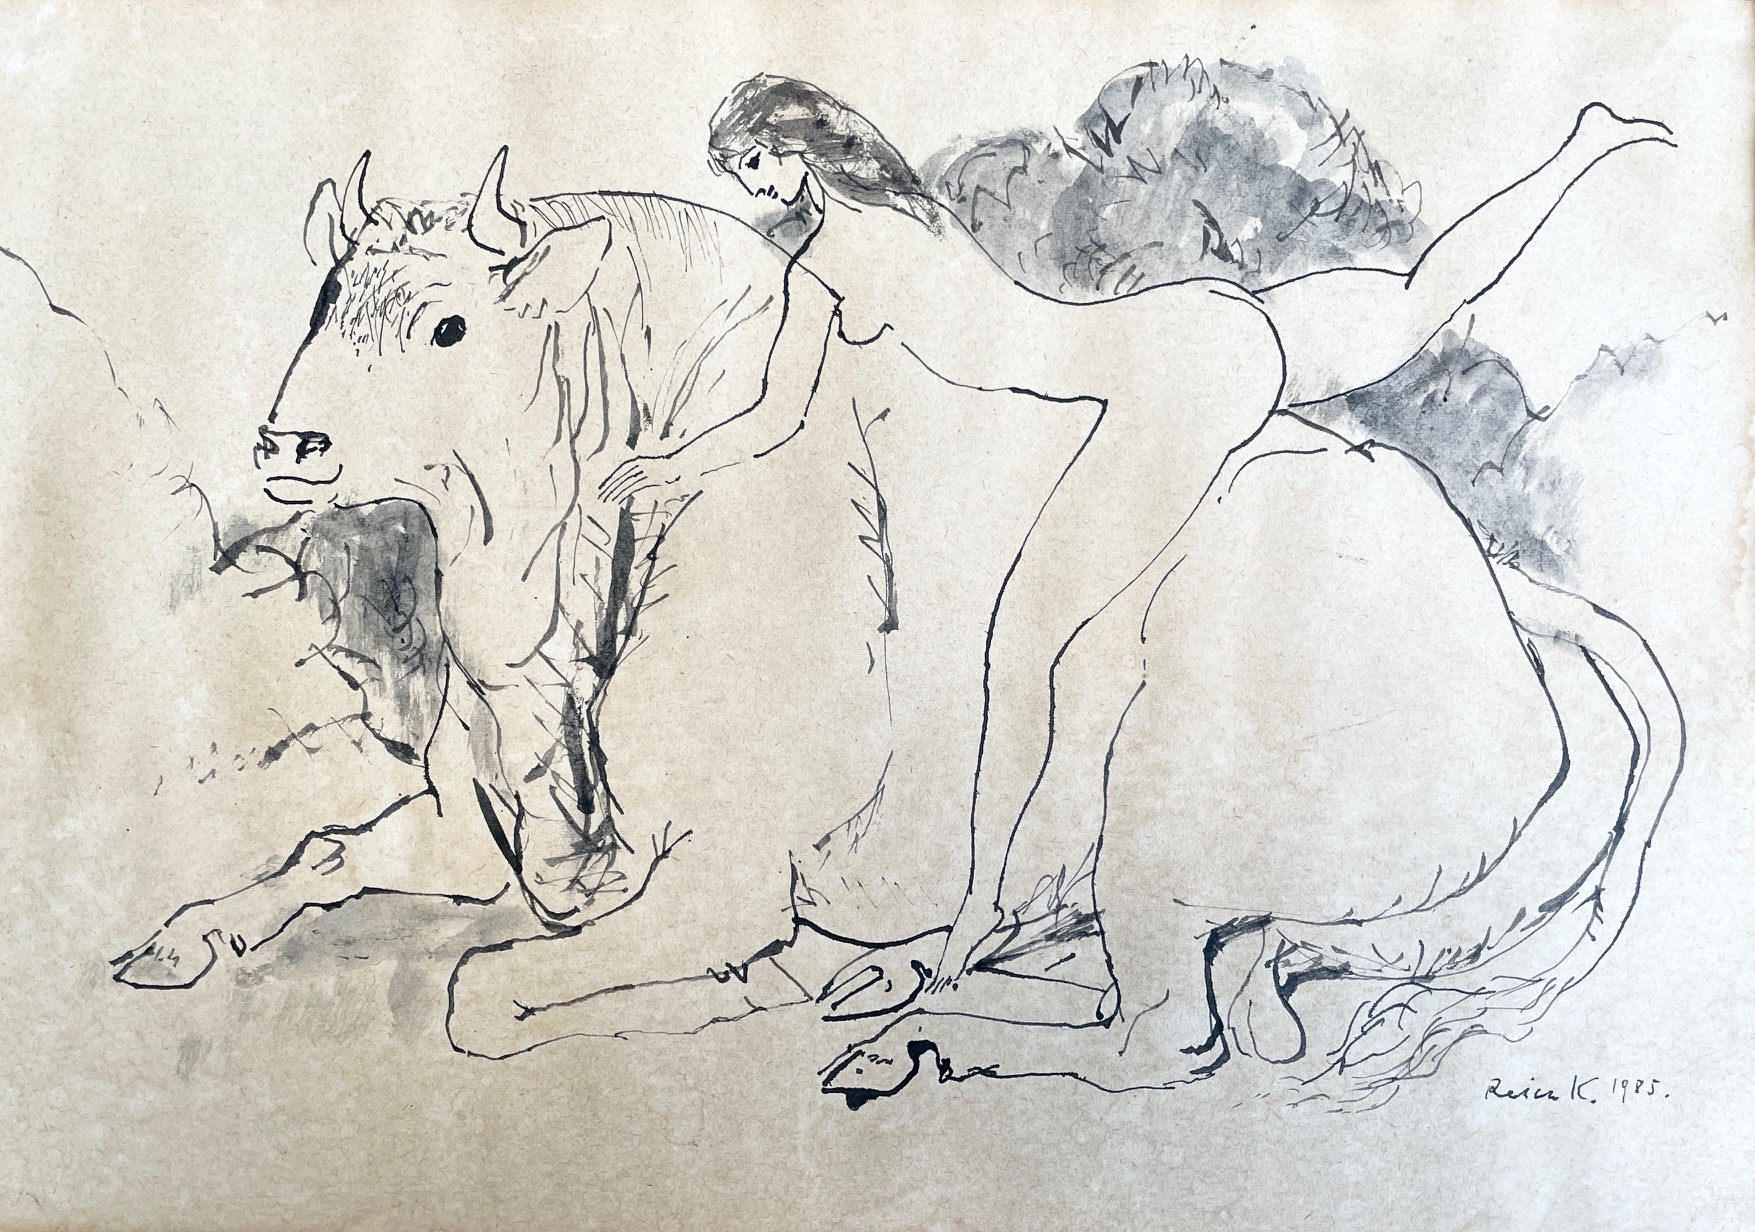 Reich, Károly: Woman with taurus